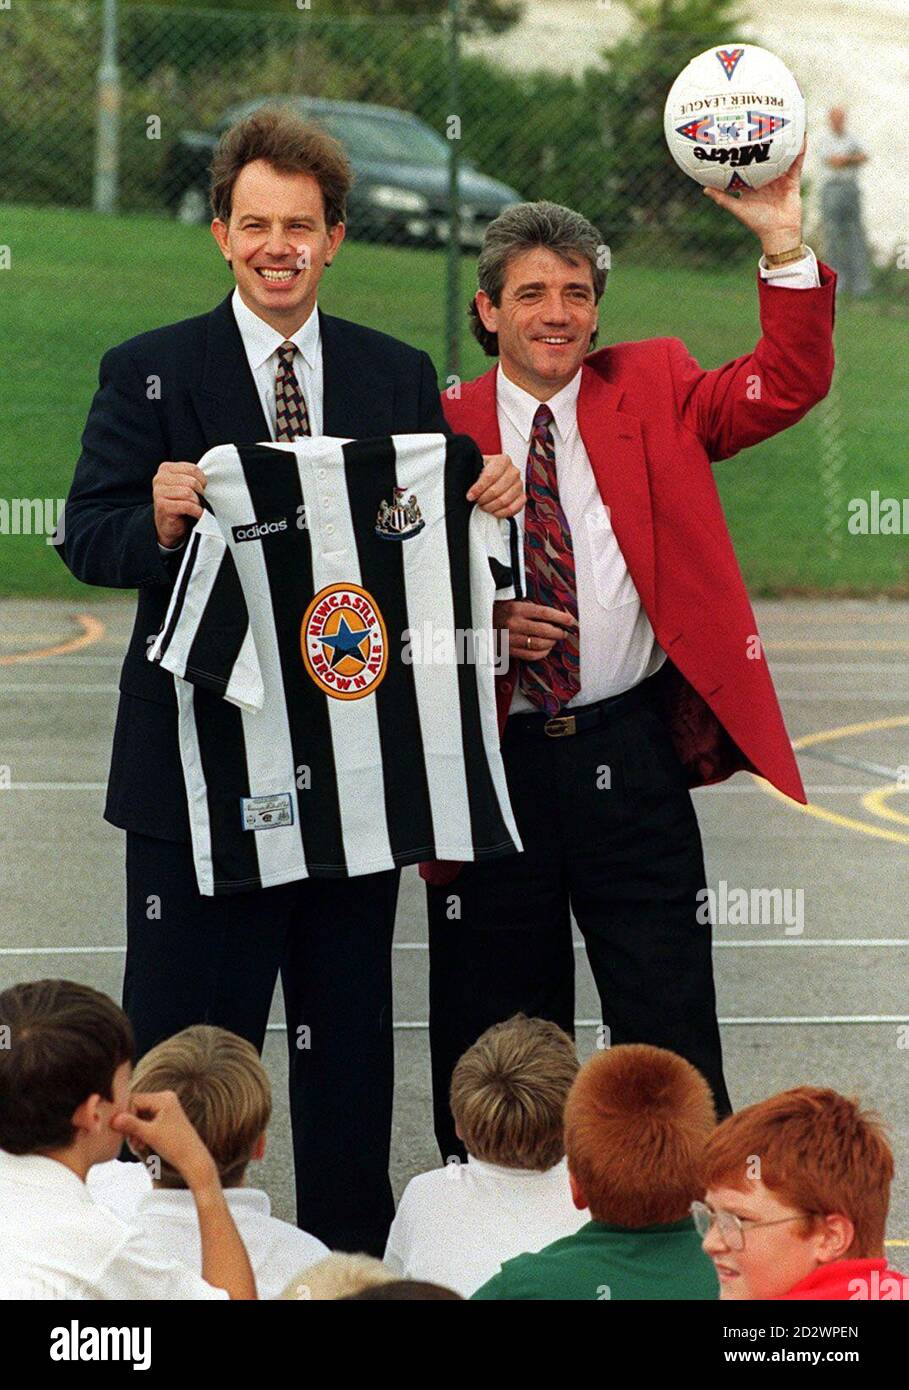 Labour leader Tony Blair (left) is presented with a shirt by Newcastle manager Kevin Keegan in Brighton. The pair later took part in a ball-heading contest during a break in party conference proceedings.   * On 8.1.97 Keegan sensationally resigned as manager of Newcastle United, saying that he no longer wanted to be in football management. Stock Photo